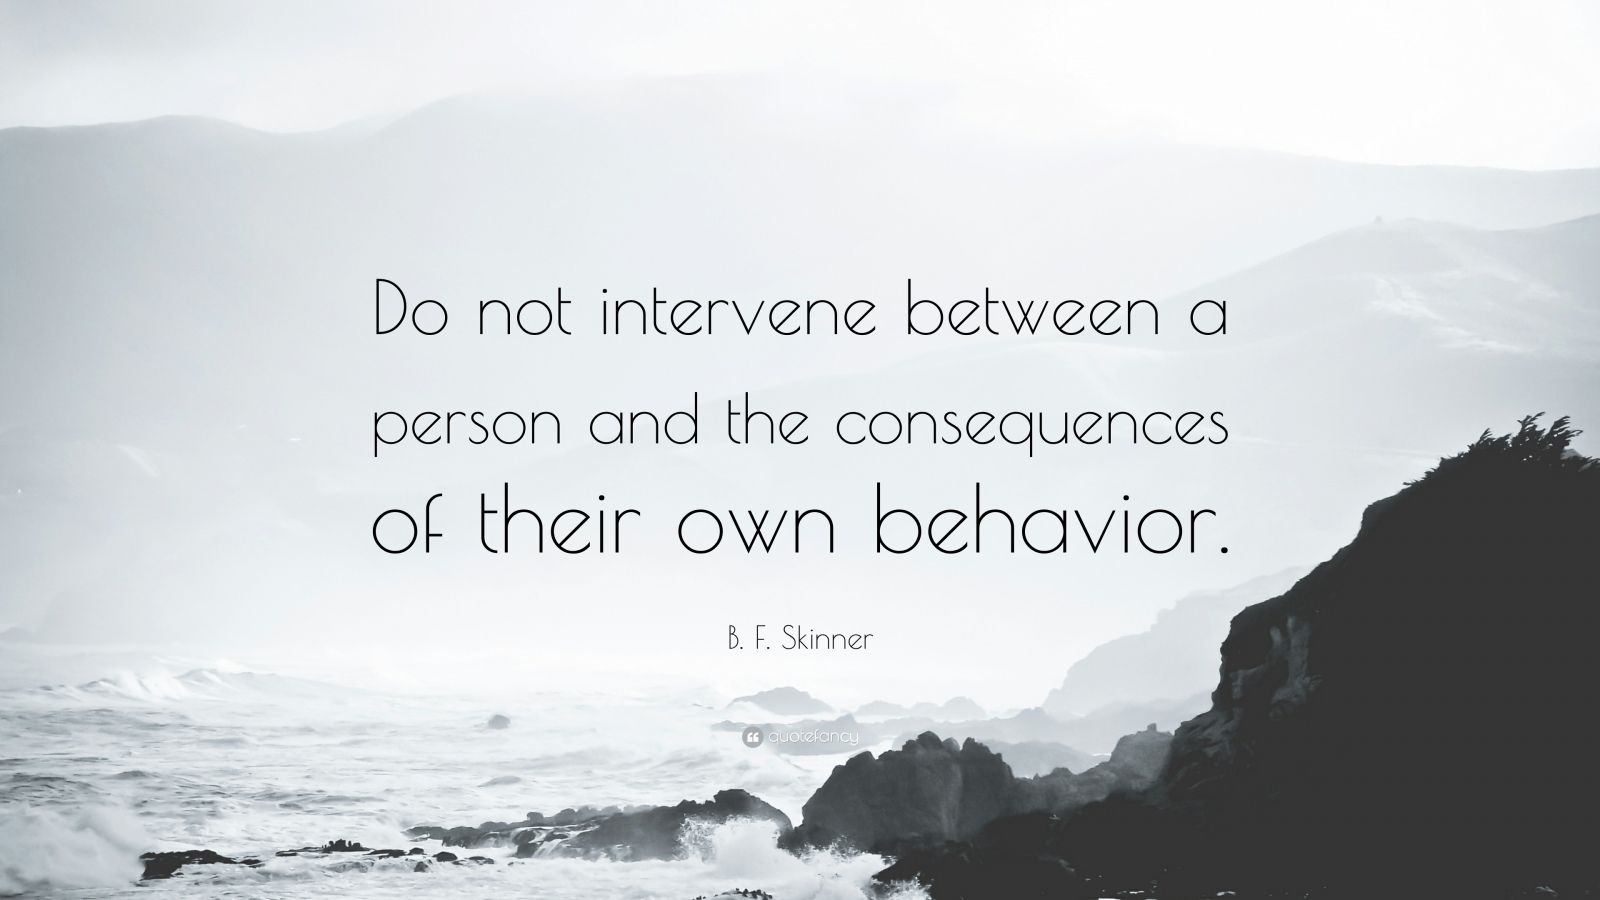 B F Skinner Quote “do Not Intervene Between A Person And The Consequences Of Their Own Behavior”